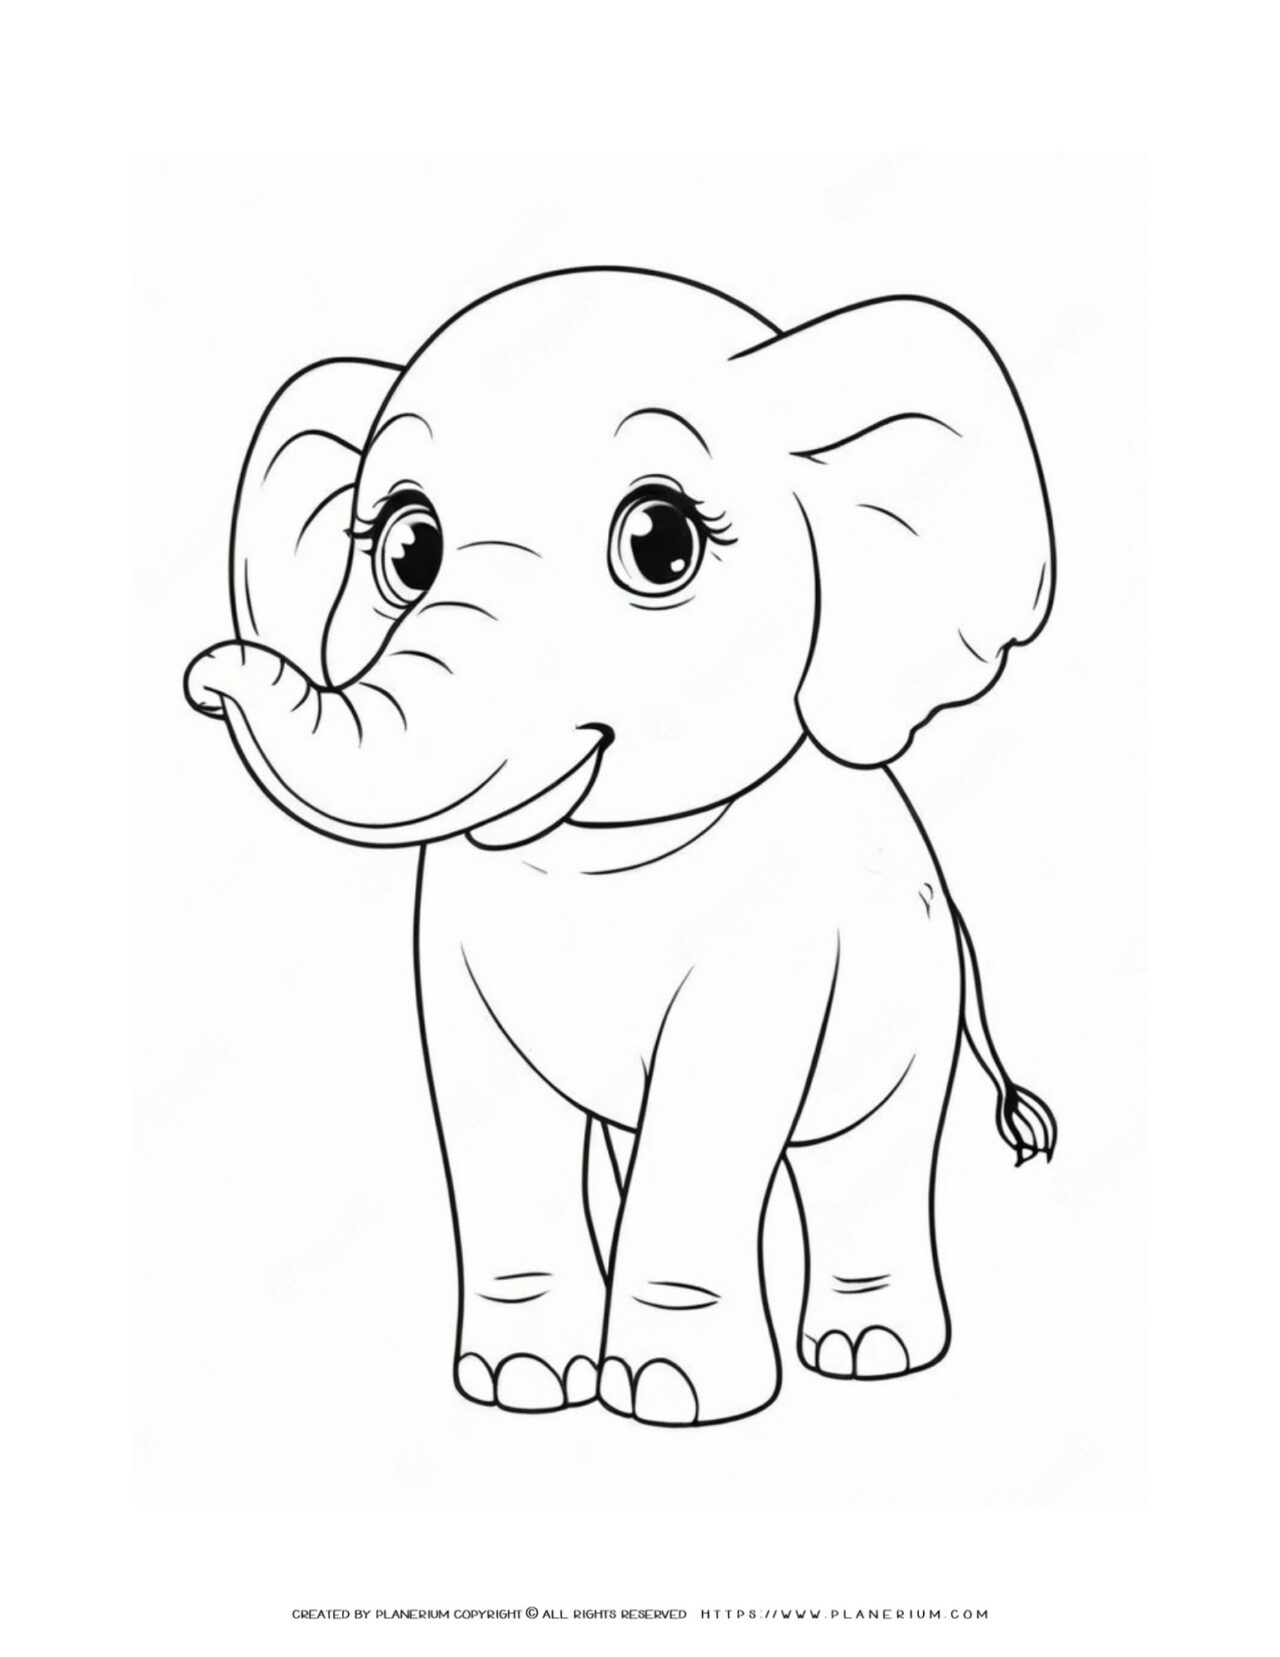 Cute-Little-Elephant-Coloring-Page